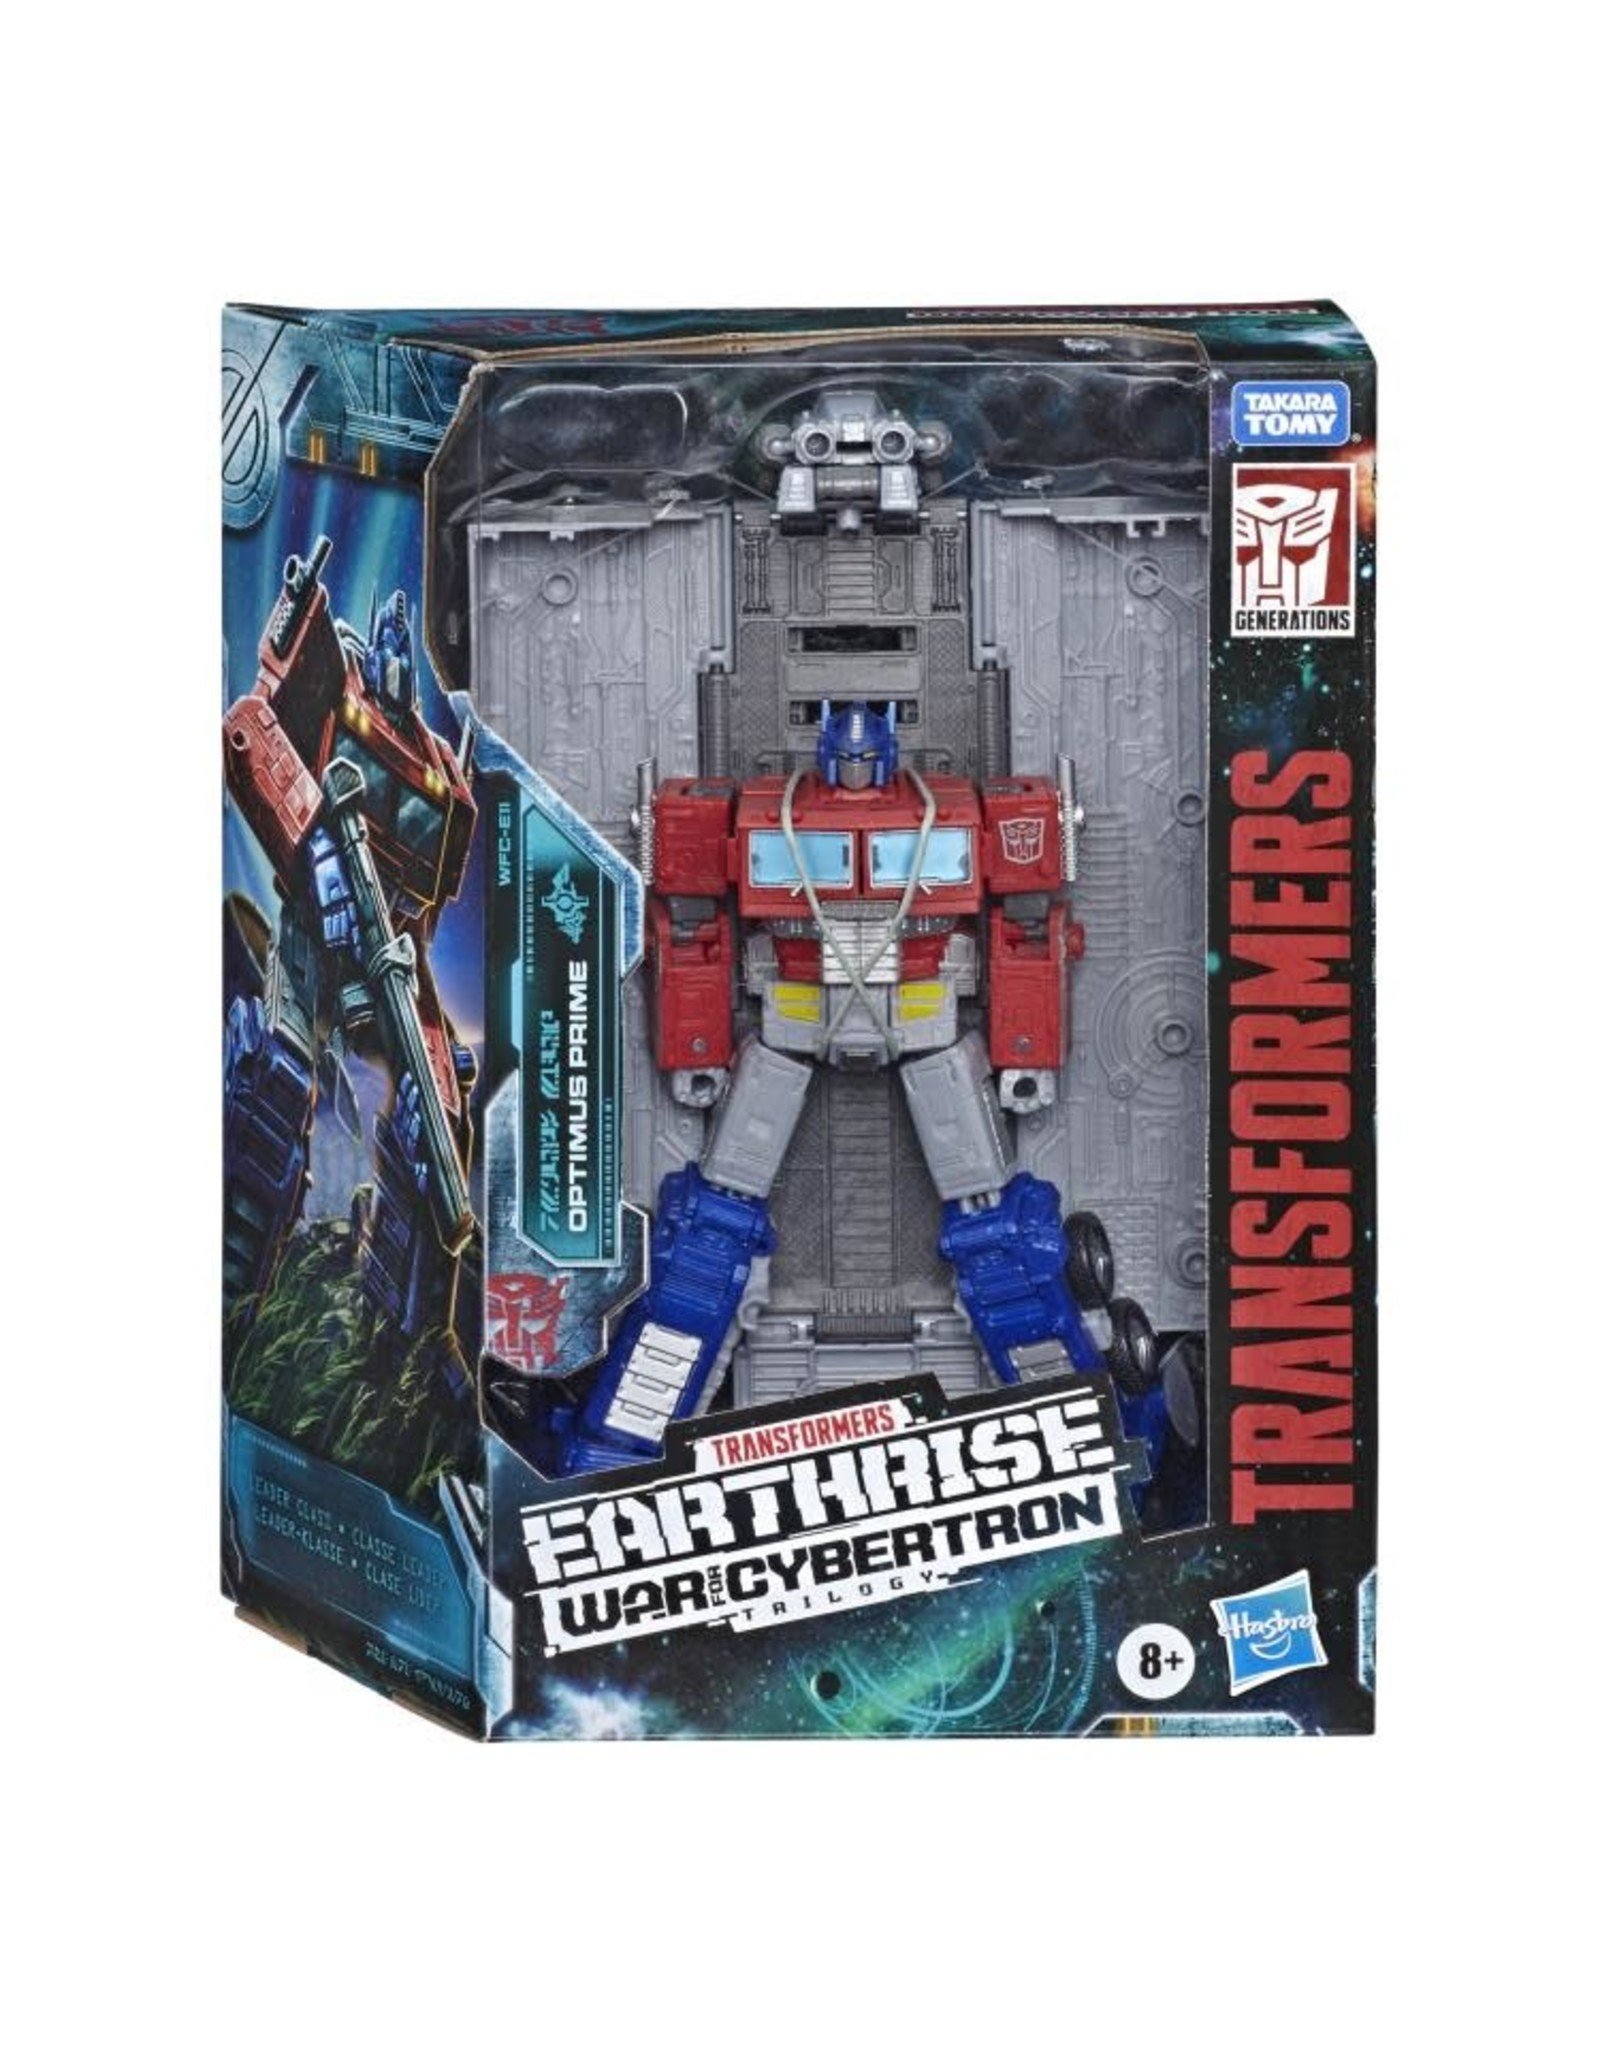 transformers fall of cybertron toys optimus prime